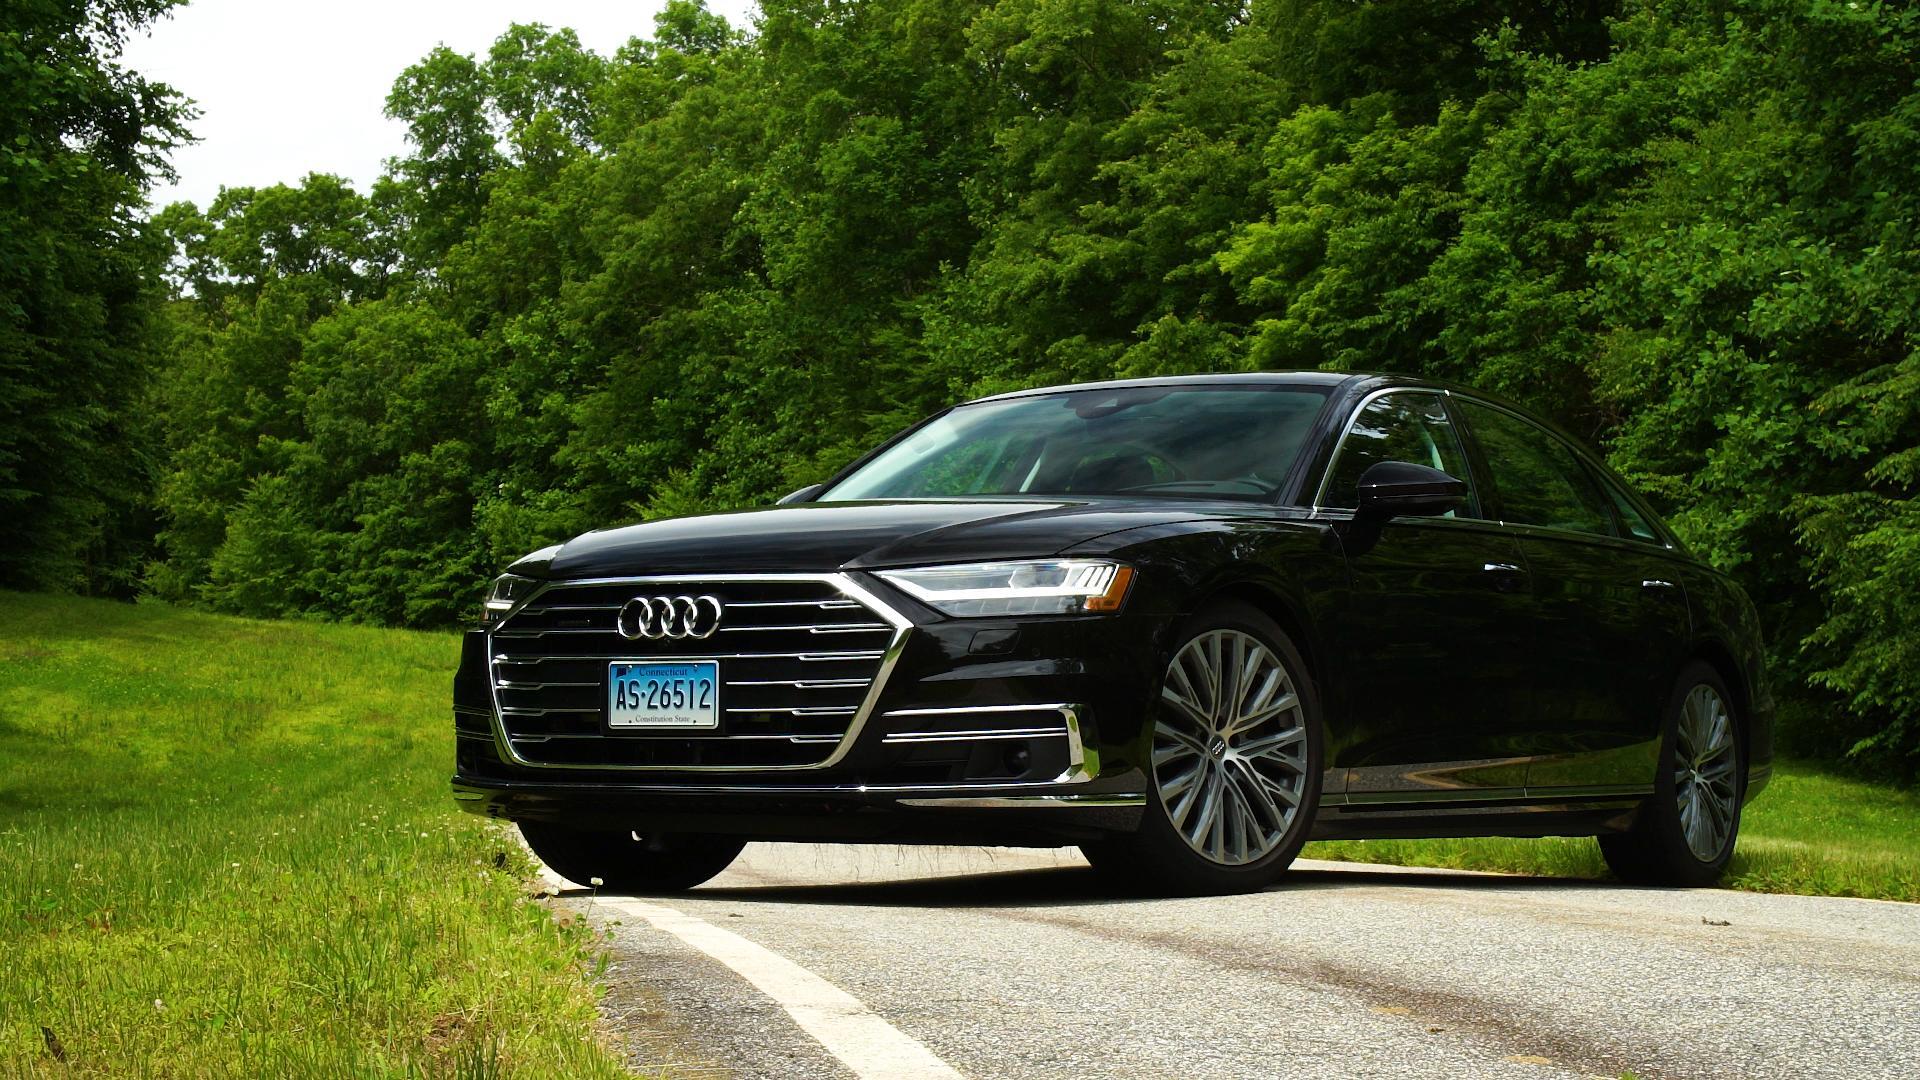 2019 Audi A8 Is a First-Class Cruiser in a Subtle Package